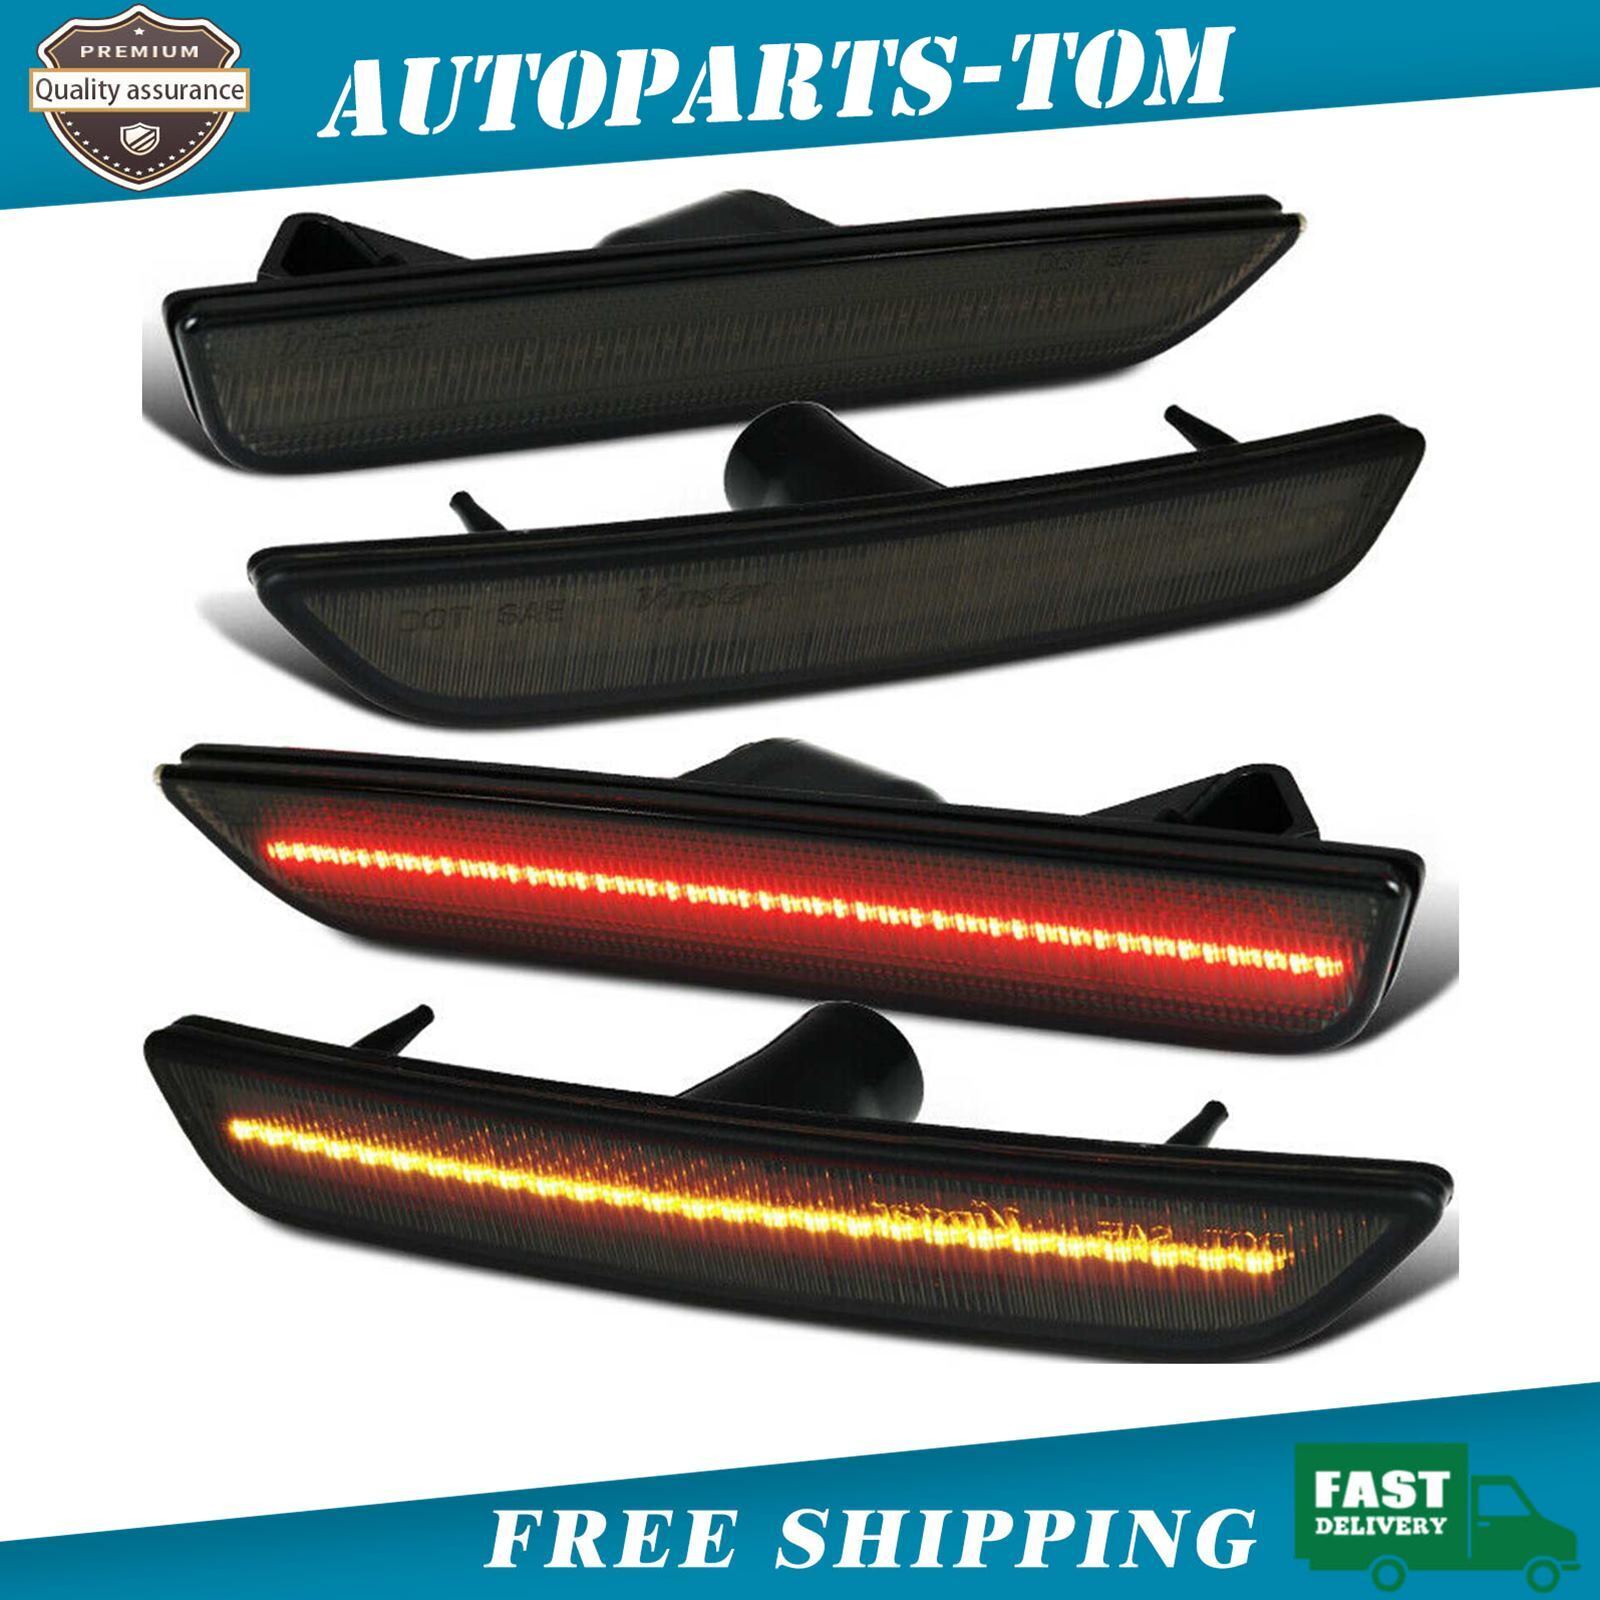 Smoked LENS LED SIDE MARKER LIGHTS FRONT & REAR SET  For Ford Mustang 2010-2014